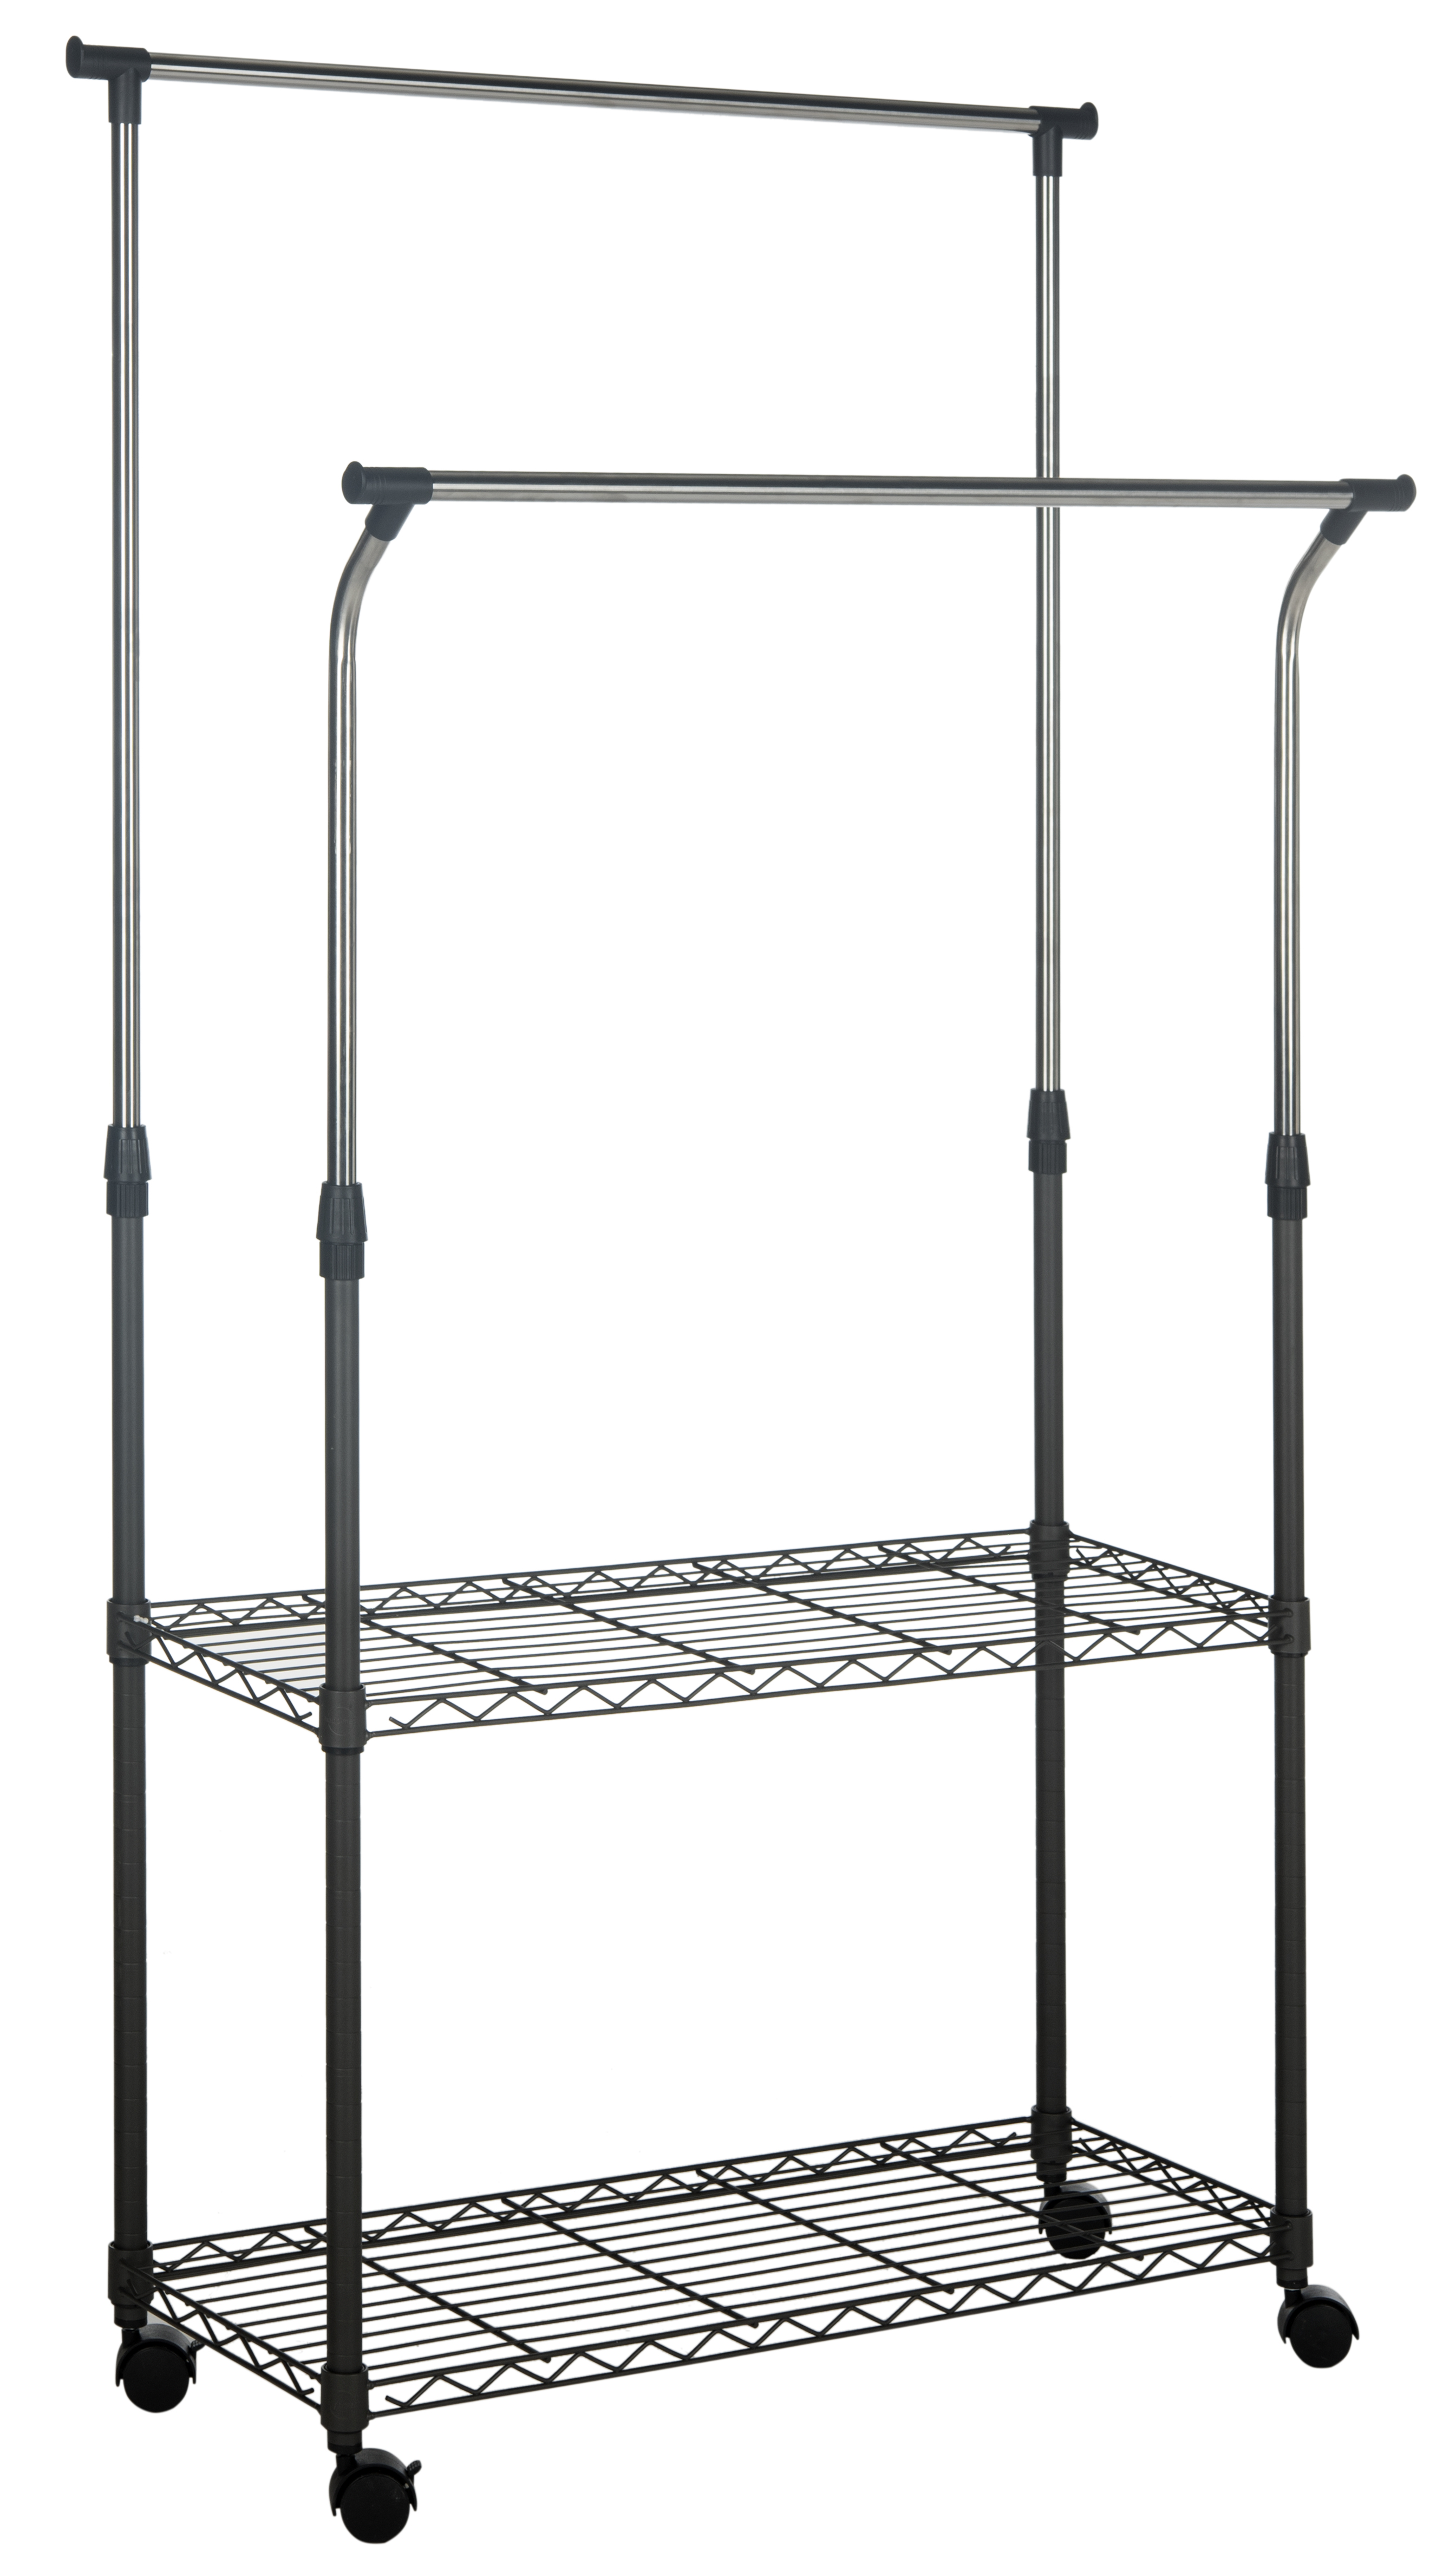 Safavieh Giorgio Chrome Wire Double Rod Clothes Rack with Casters - image 2 of 6